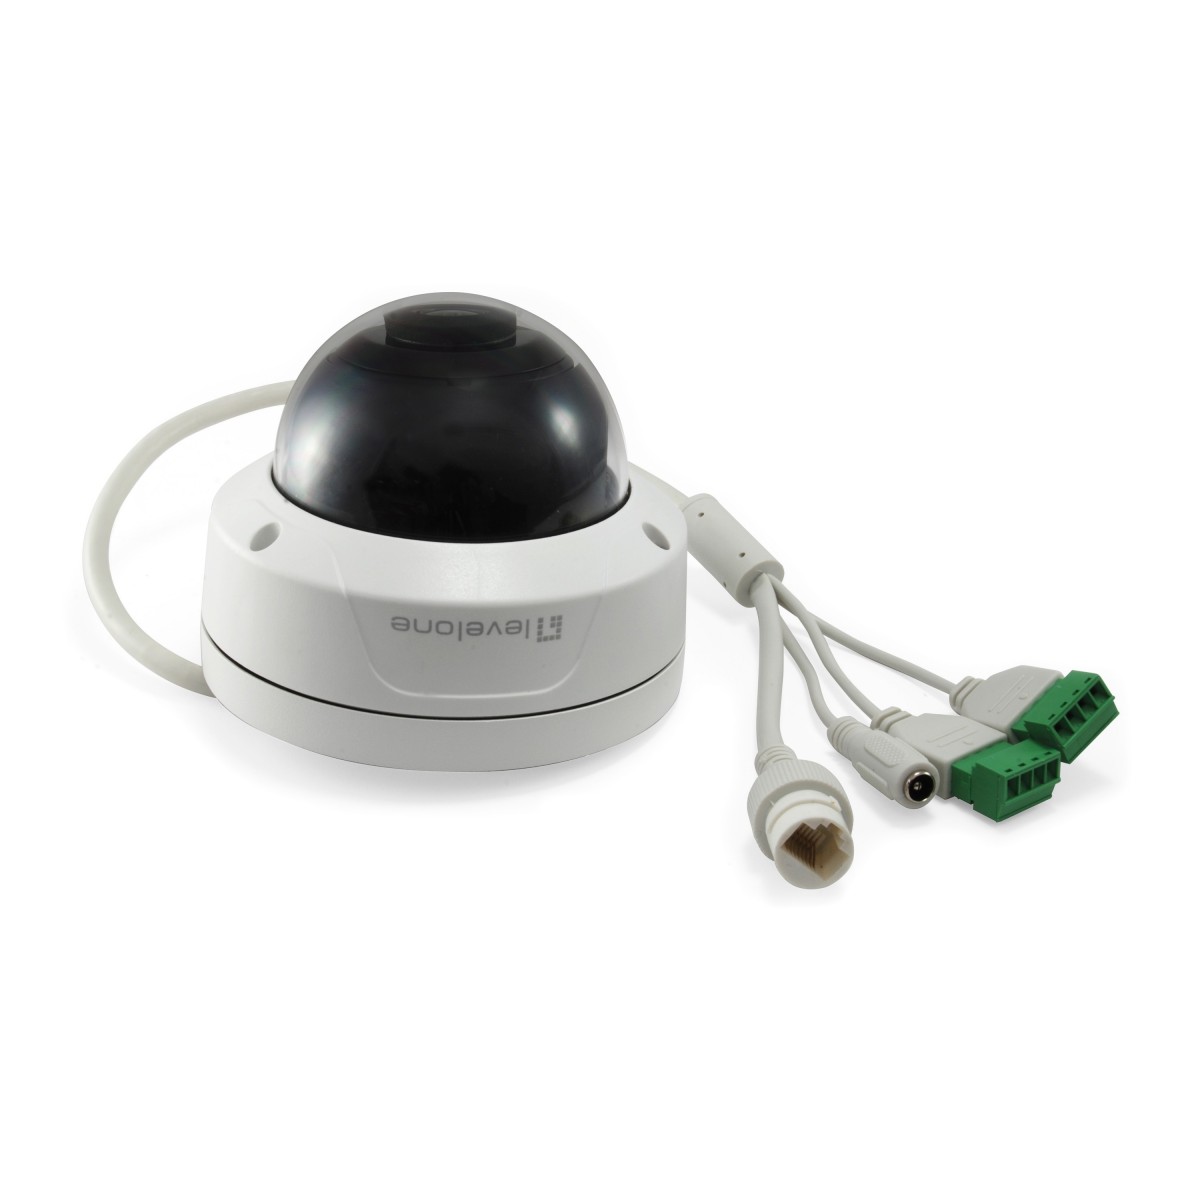 LevelOne GEMINI Fixed Dome IP Network Camera - H.265 - 5-Megapixel - 802.3af PoE - Vandalproof - IR LEDs - two-way audio - Indoo